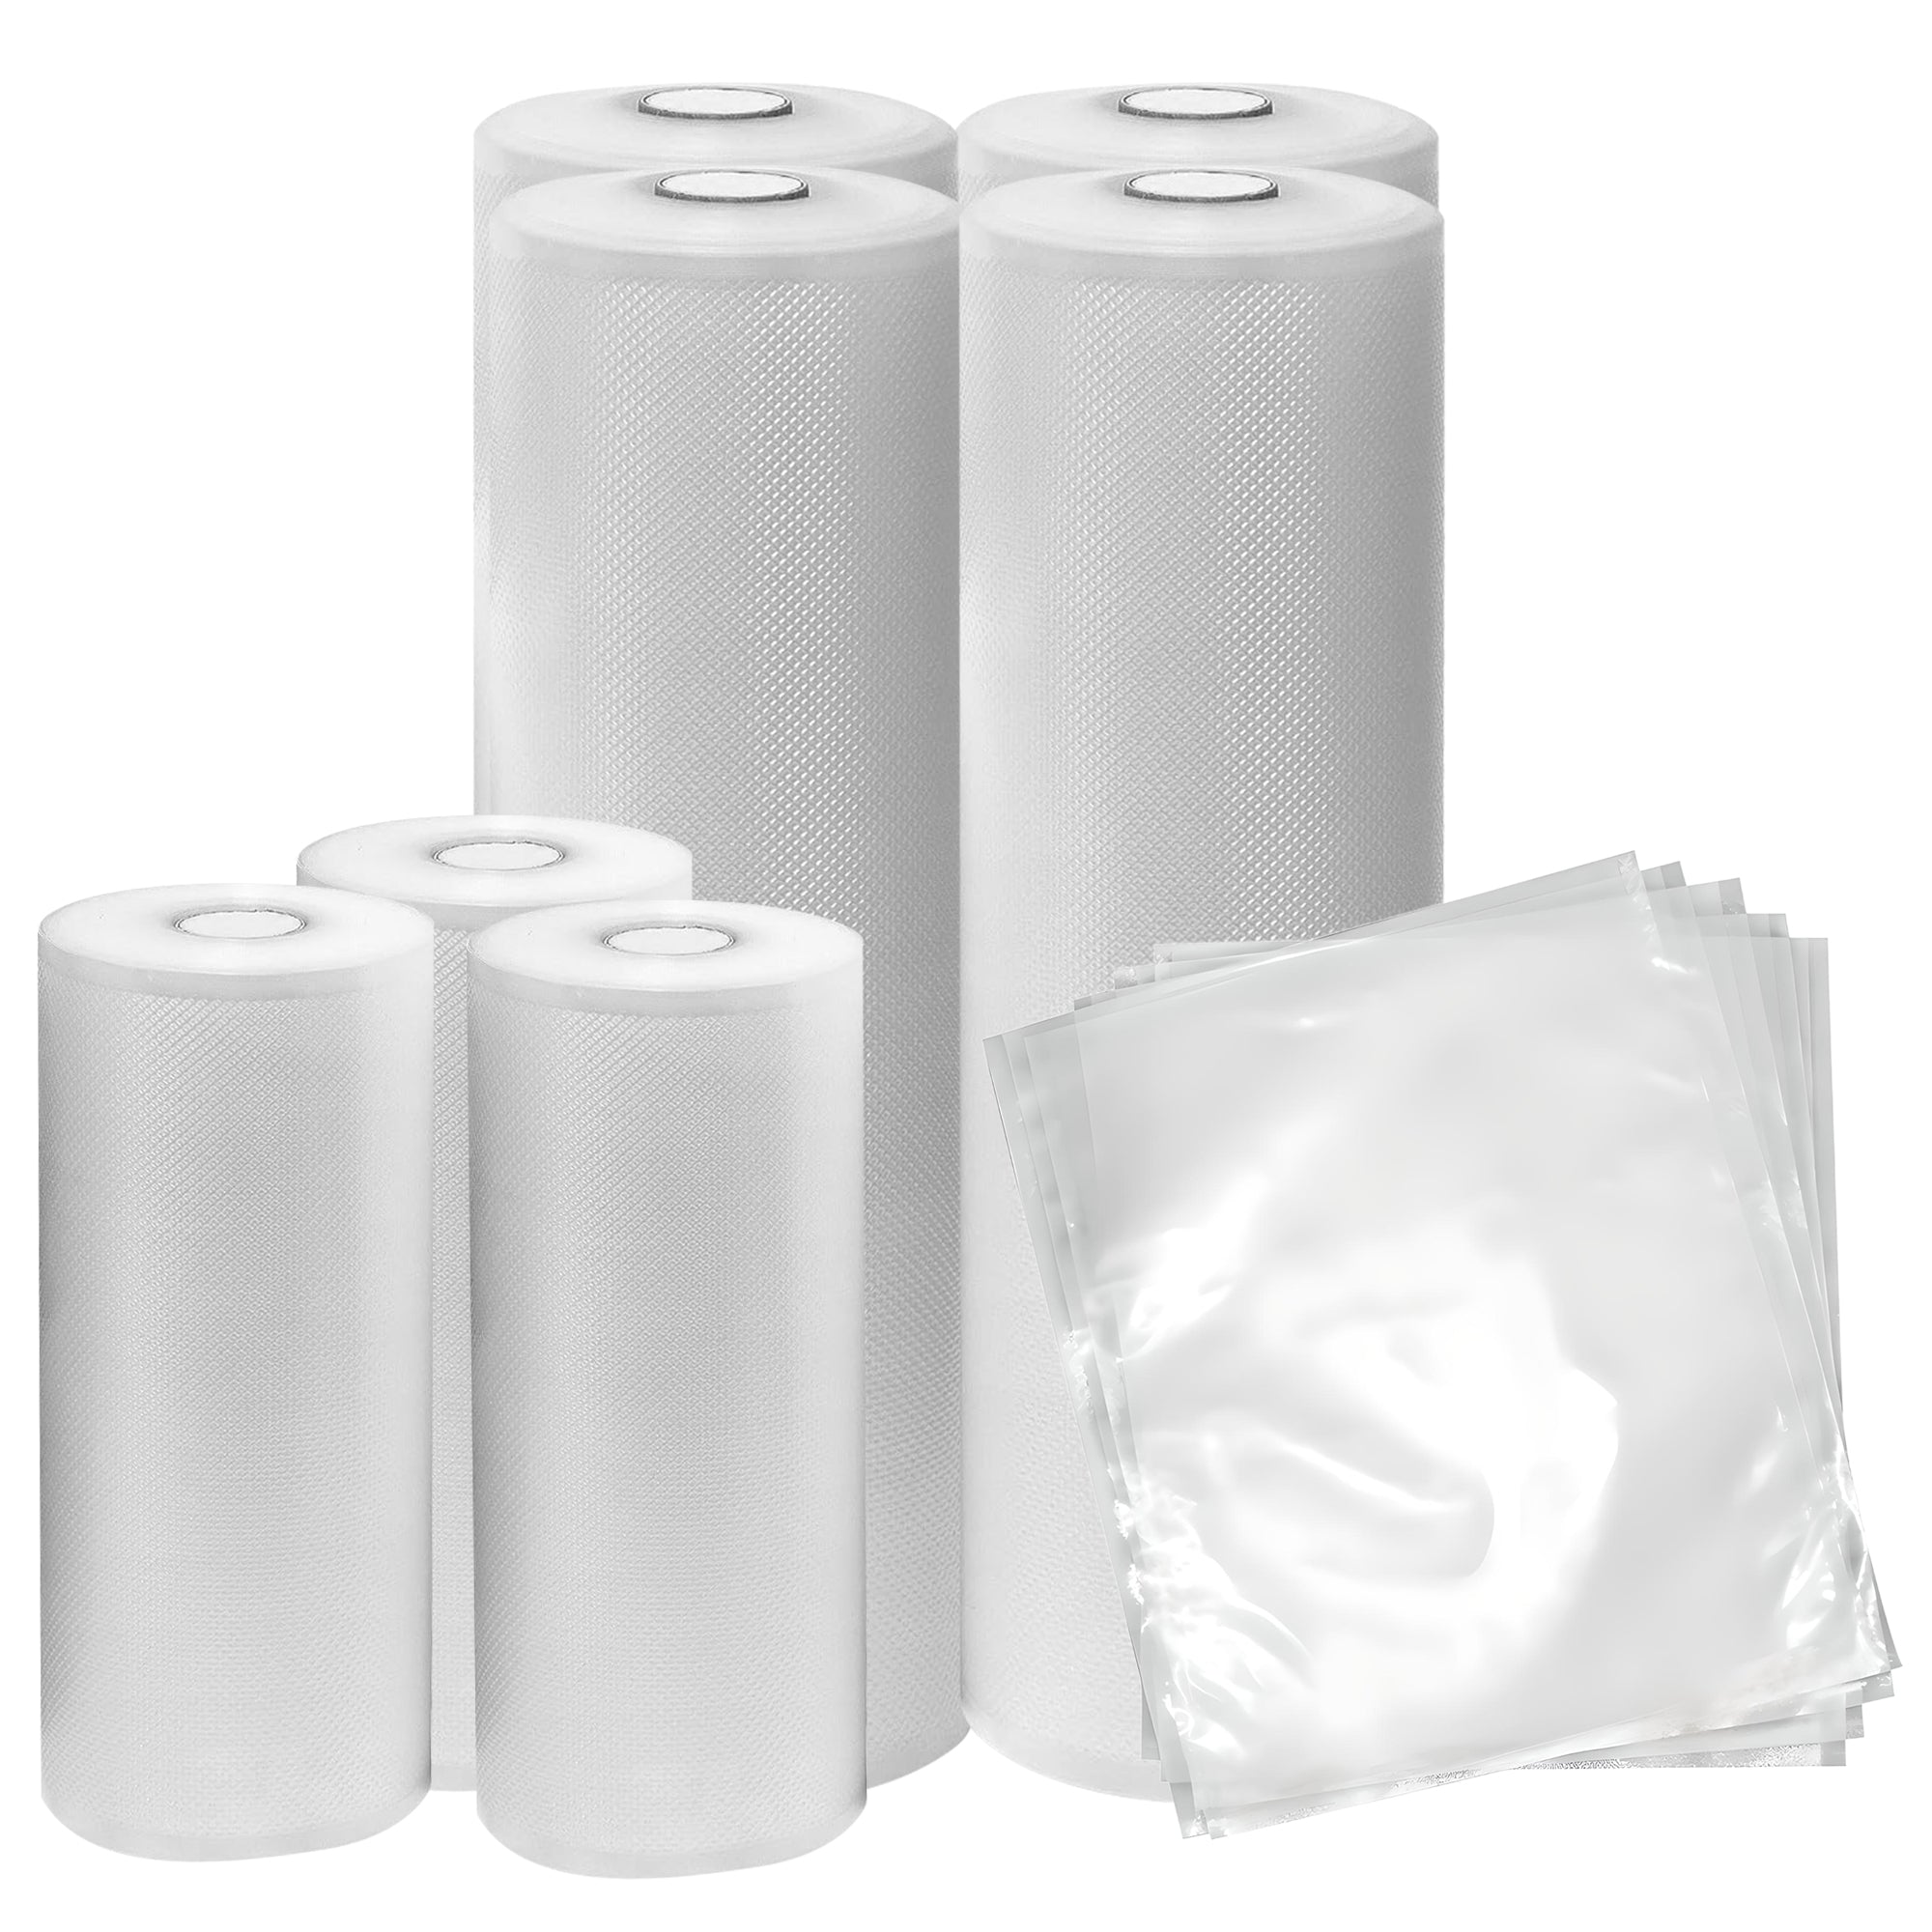 4 large bag rolls, 3 small bag rolls, and a pile of precut vacuum sealing bags on a white background